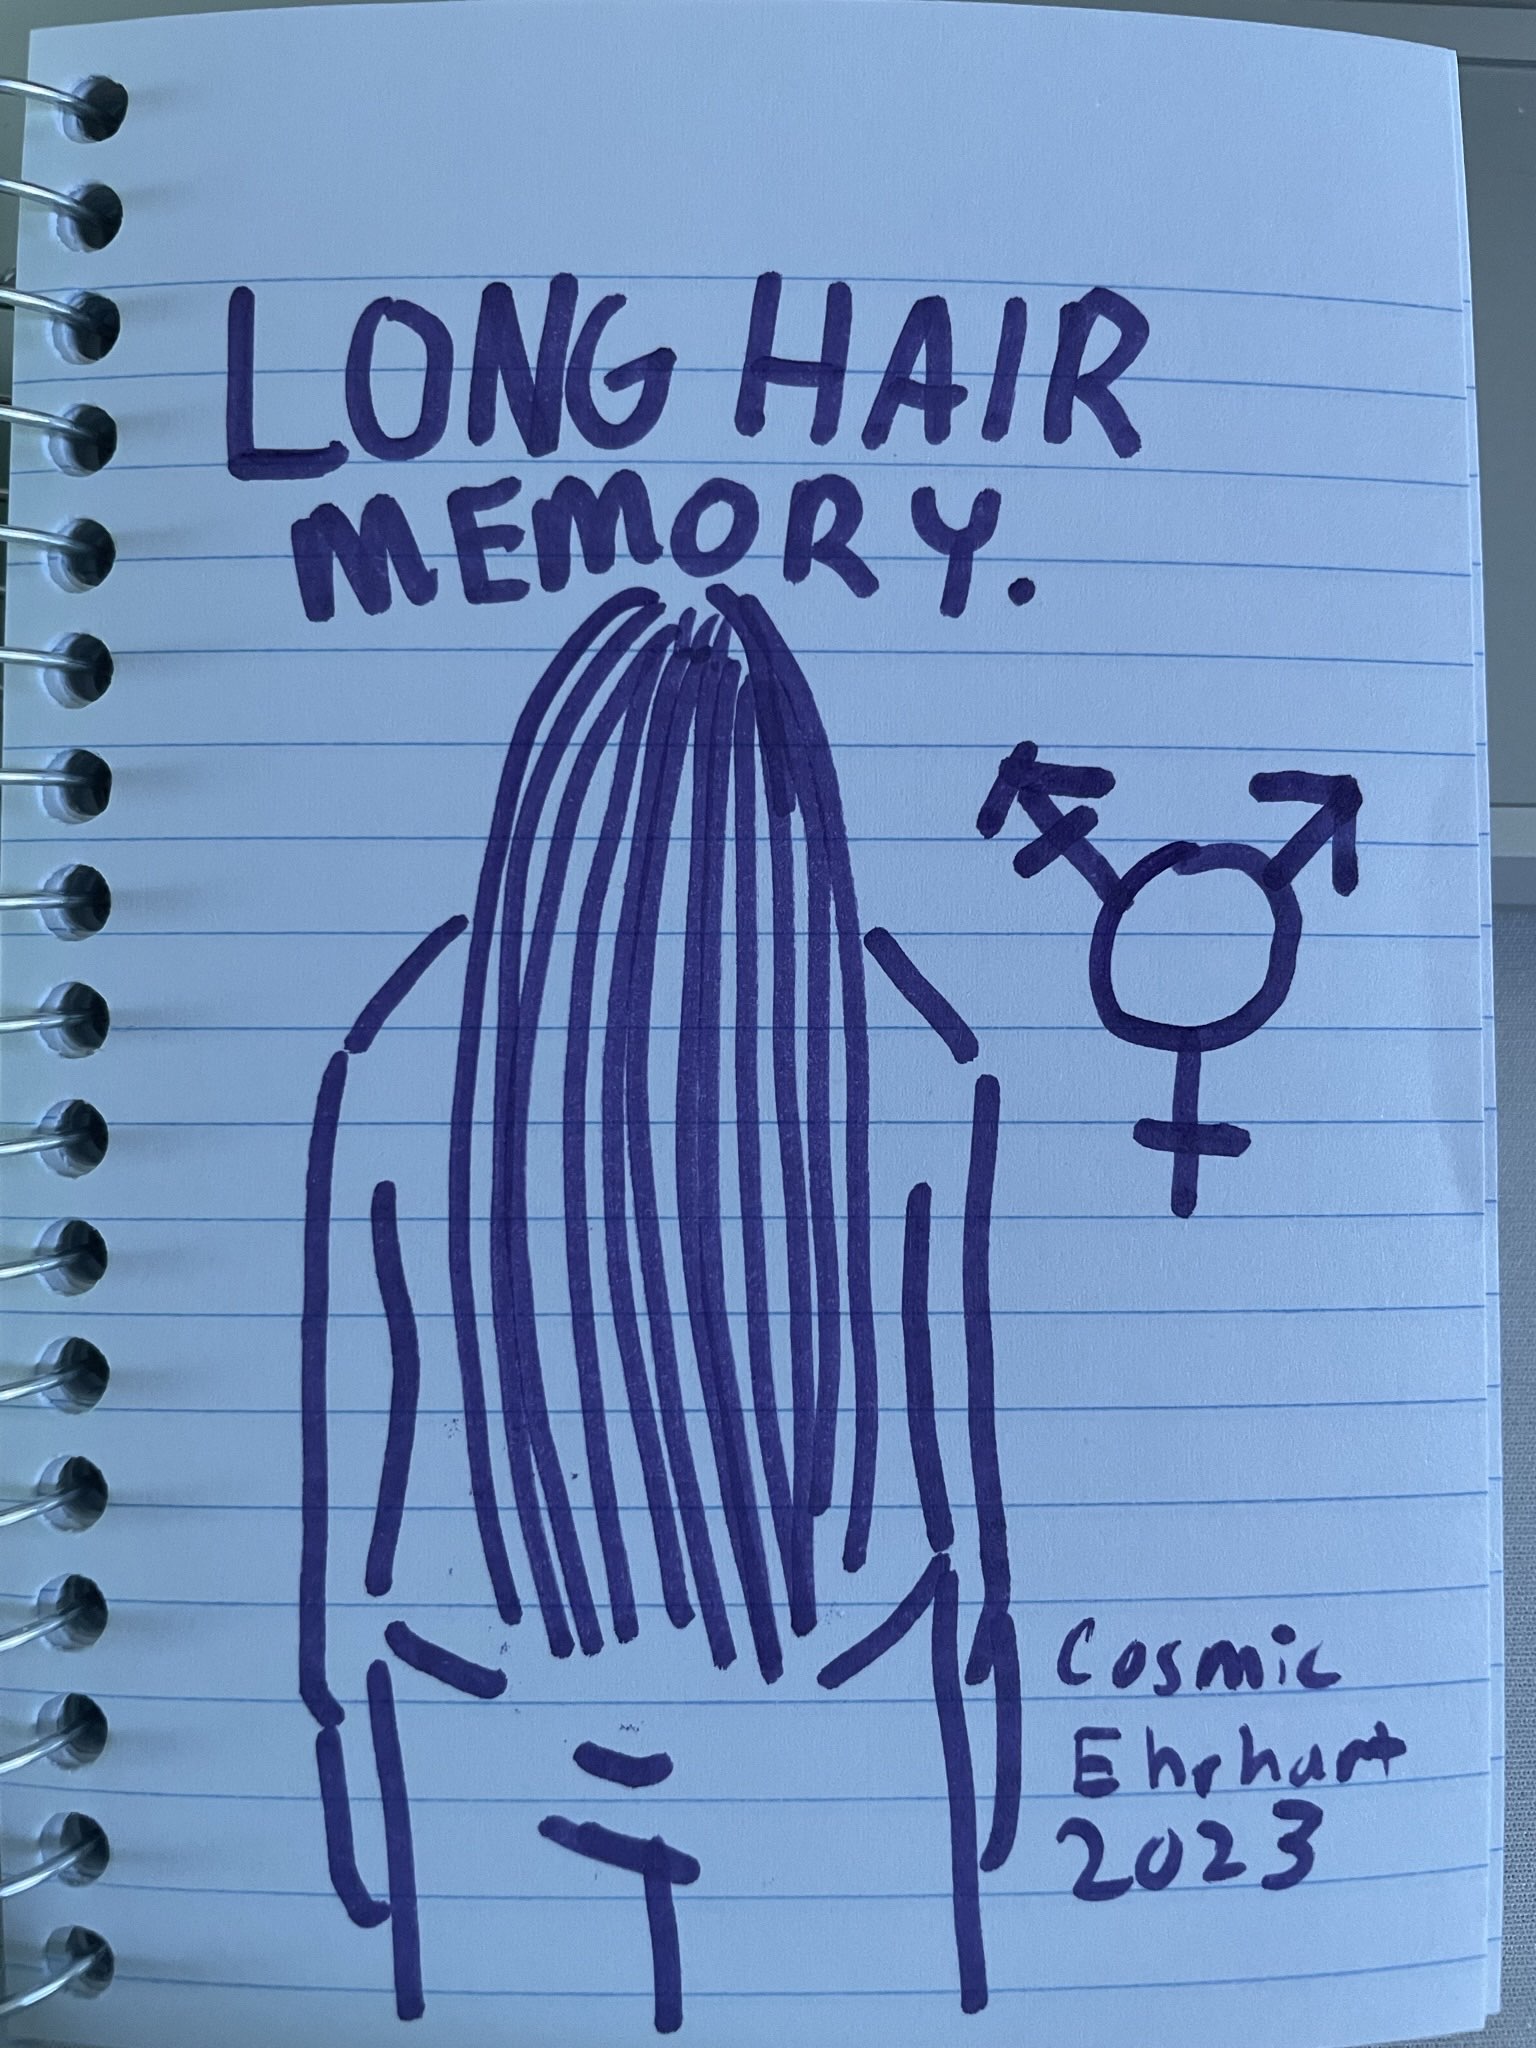 A drawing on notebook paper of a longhaired person standing. Their hair is straight and extends down past their midsection. Above them is the title of the zine: Long Hair Memory. Next to the title is the transgender symbol, and Cosmic Ehrhart 2023.